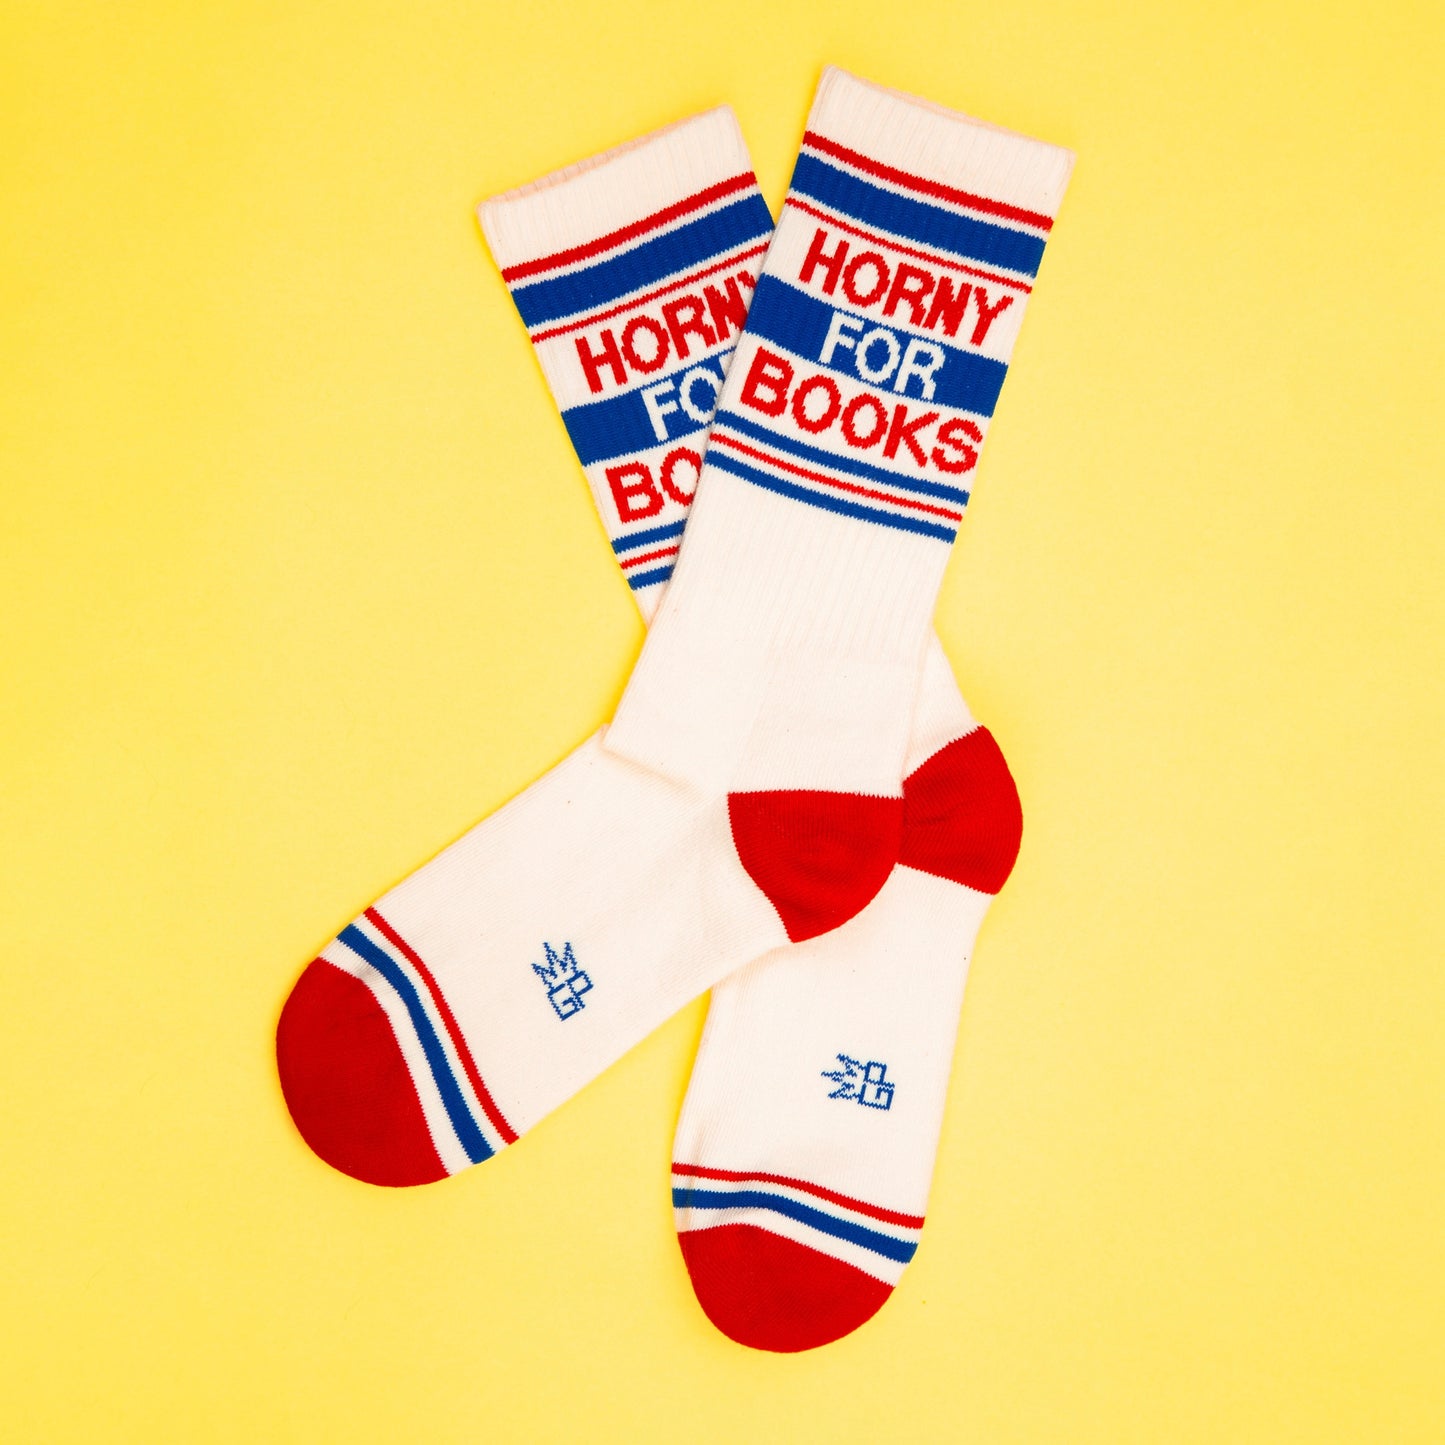 Gumball Poodle - Horny For Books Gym Crew Socks